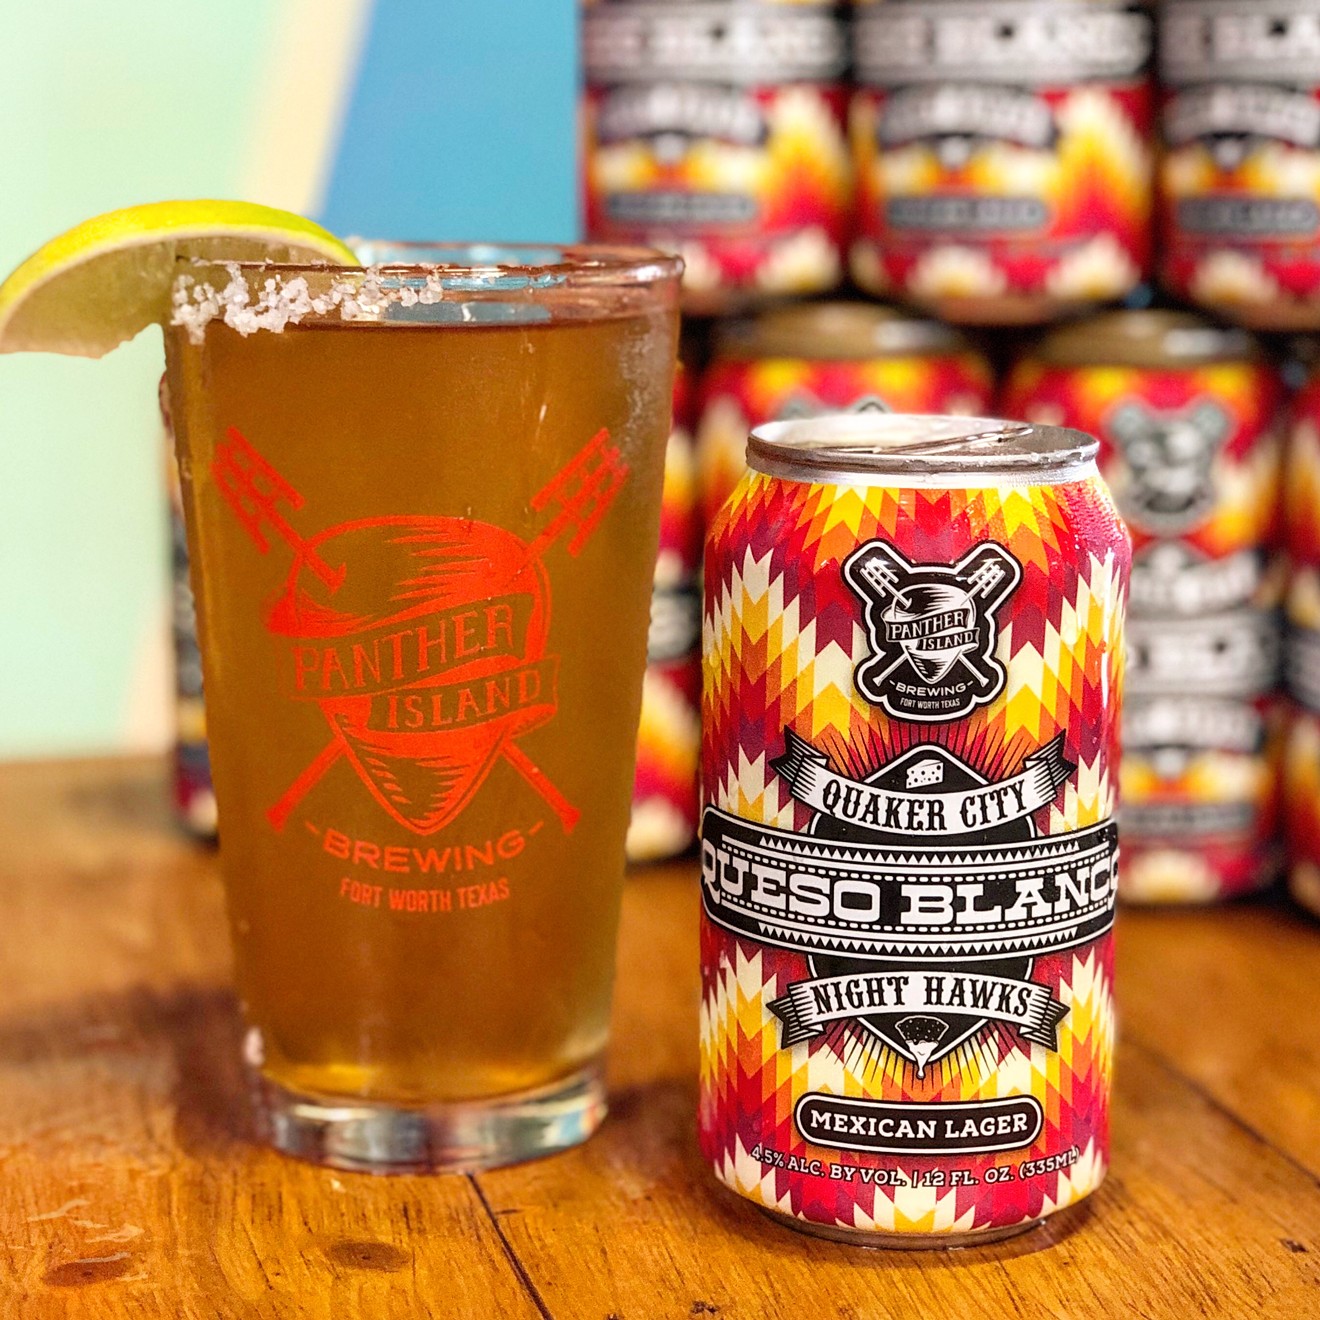 The Queso Blanco Mexican lager release party, featuring a performance by Sam Anderson of Quaker City Night Hawks,  will be at 6 p.m. Friday, Aug. 30.